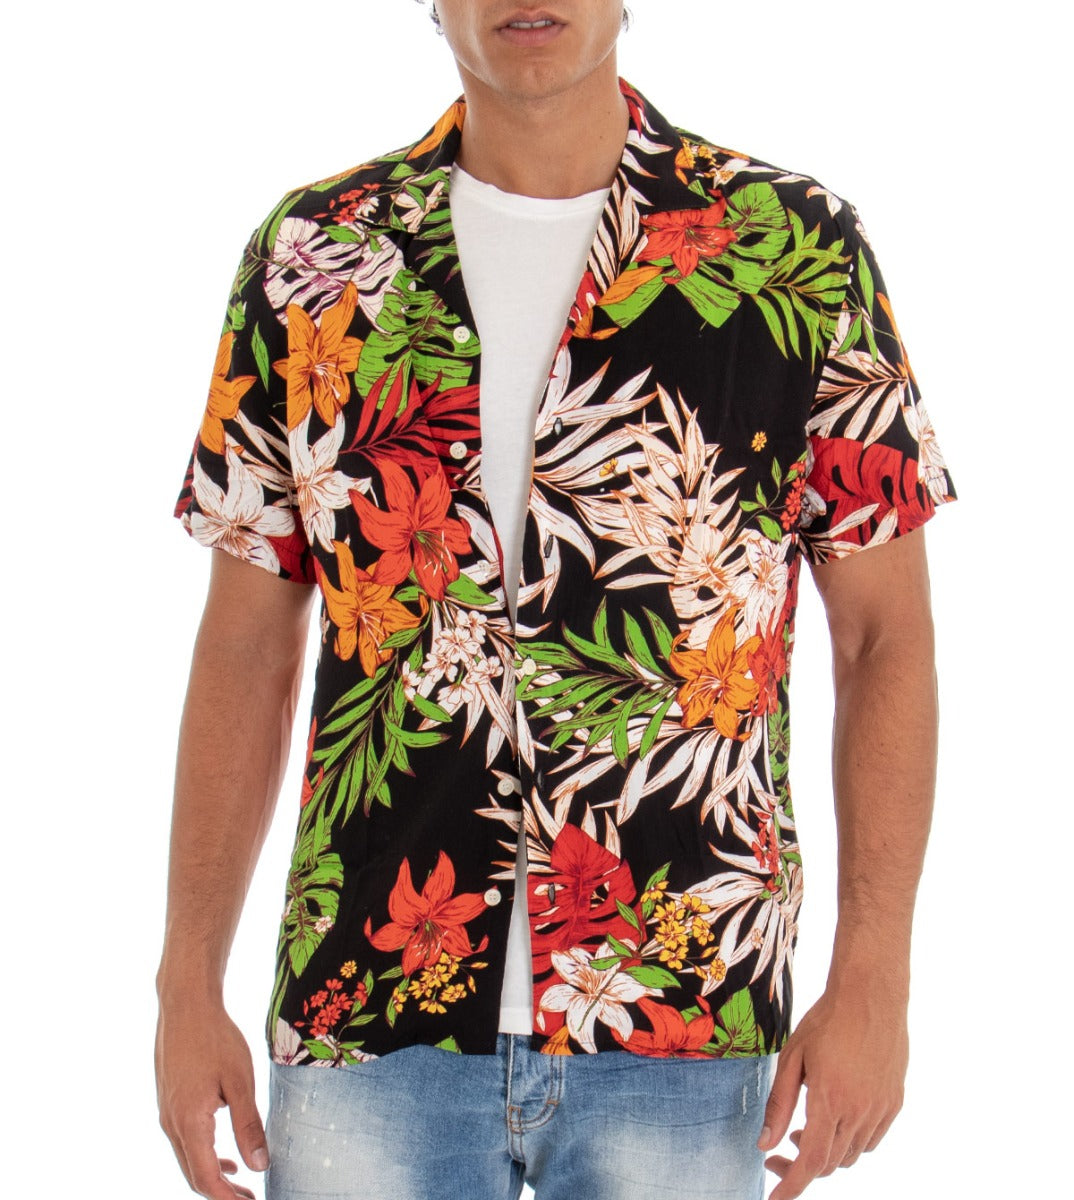 Men's Short Sleeve Shirt with Collar Multicolored Floral Pattern Black GIOSAL-CC1108A